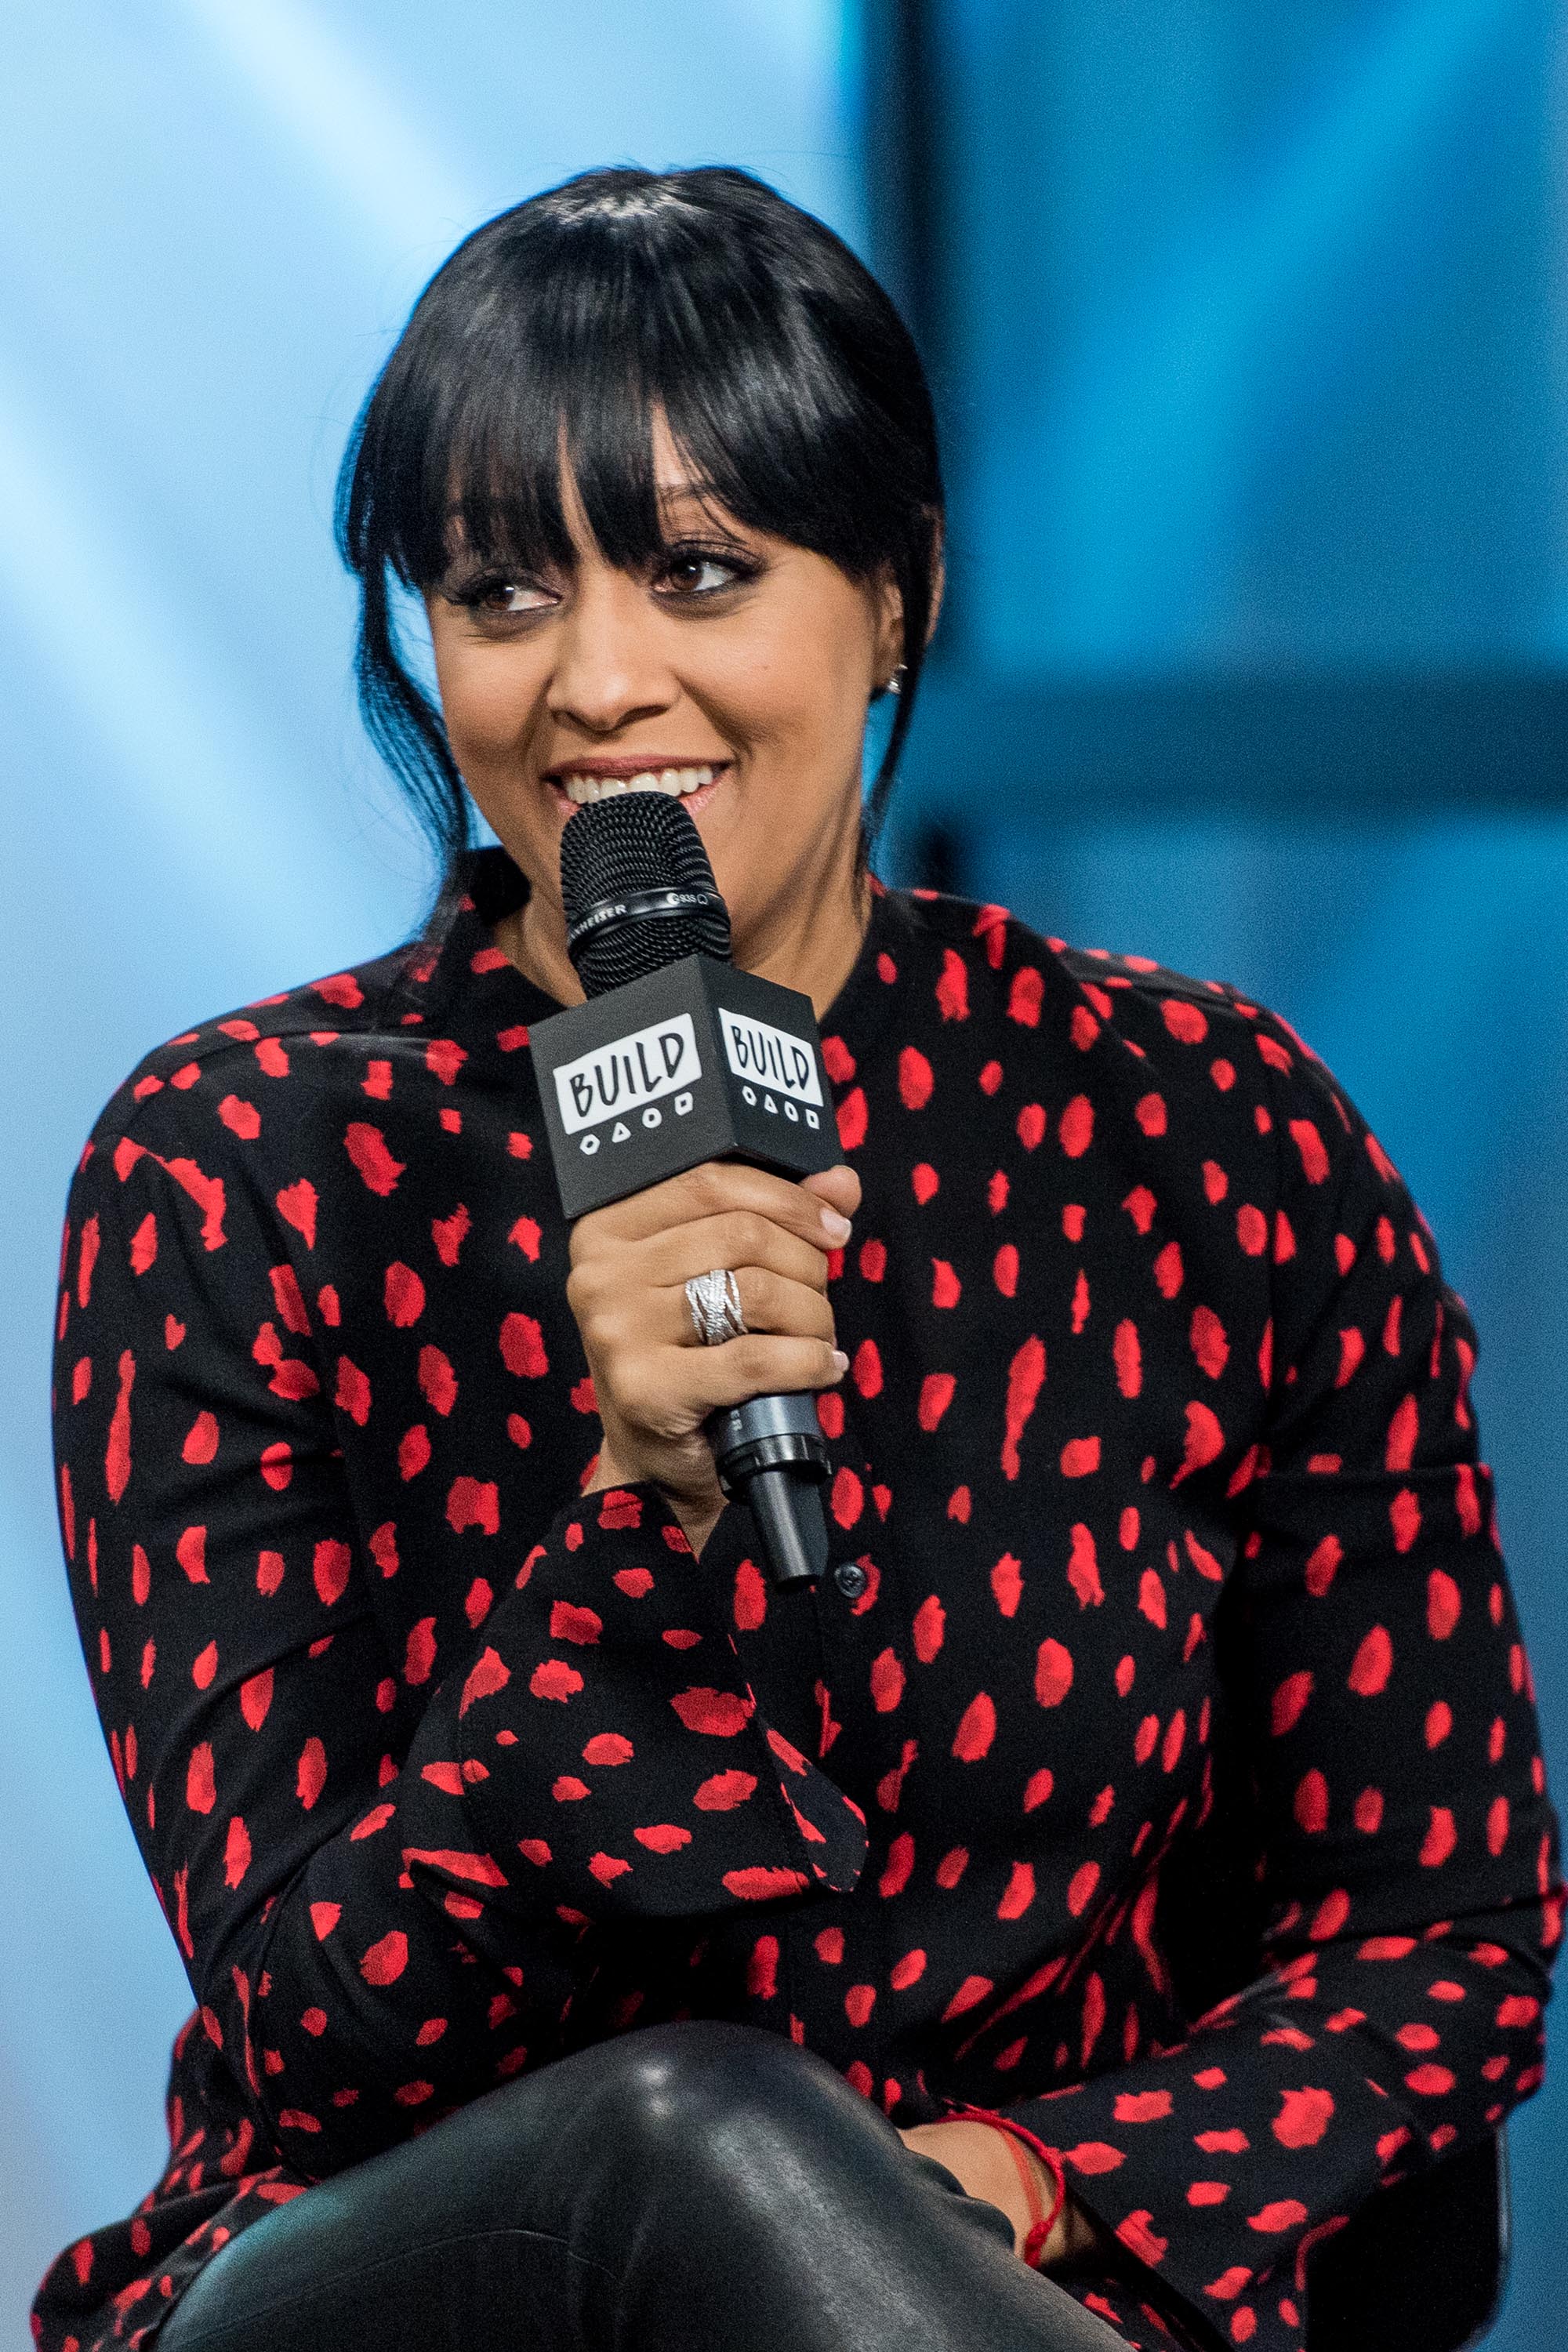 Tia Mowry attends Build Series to discuss her new book ‘Whole New You’